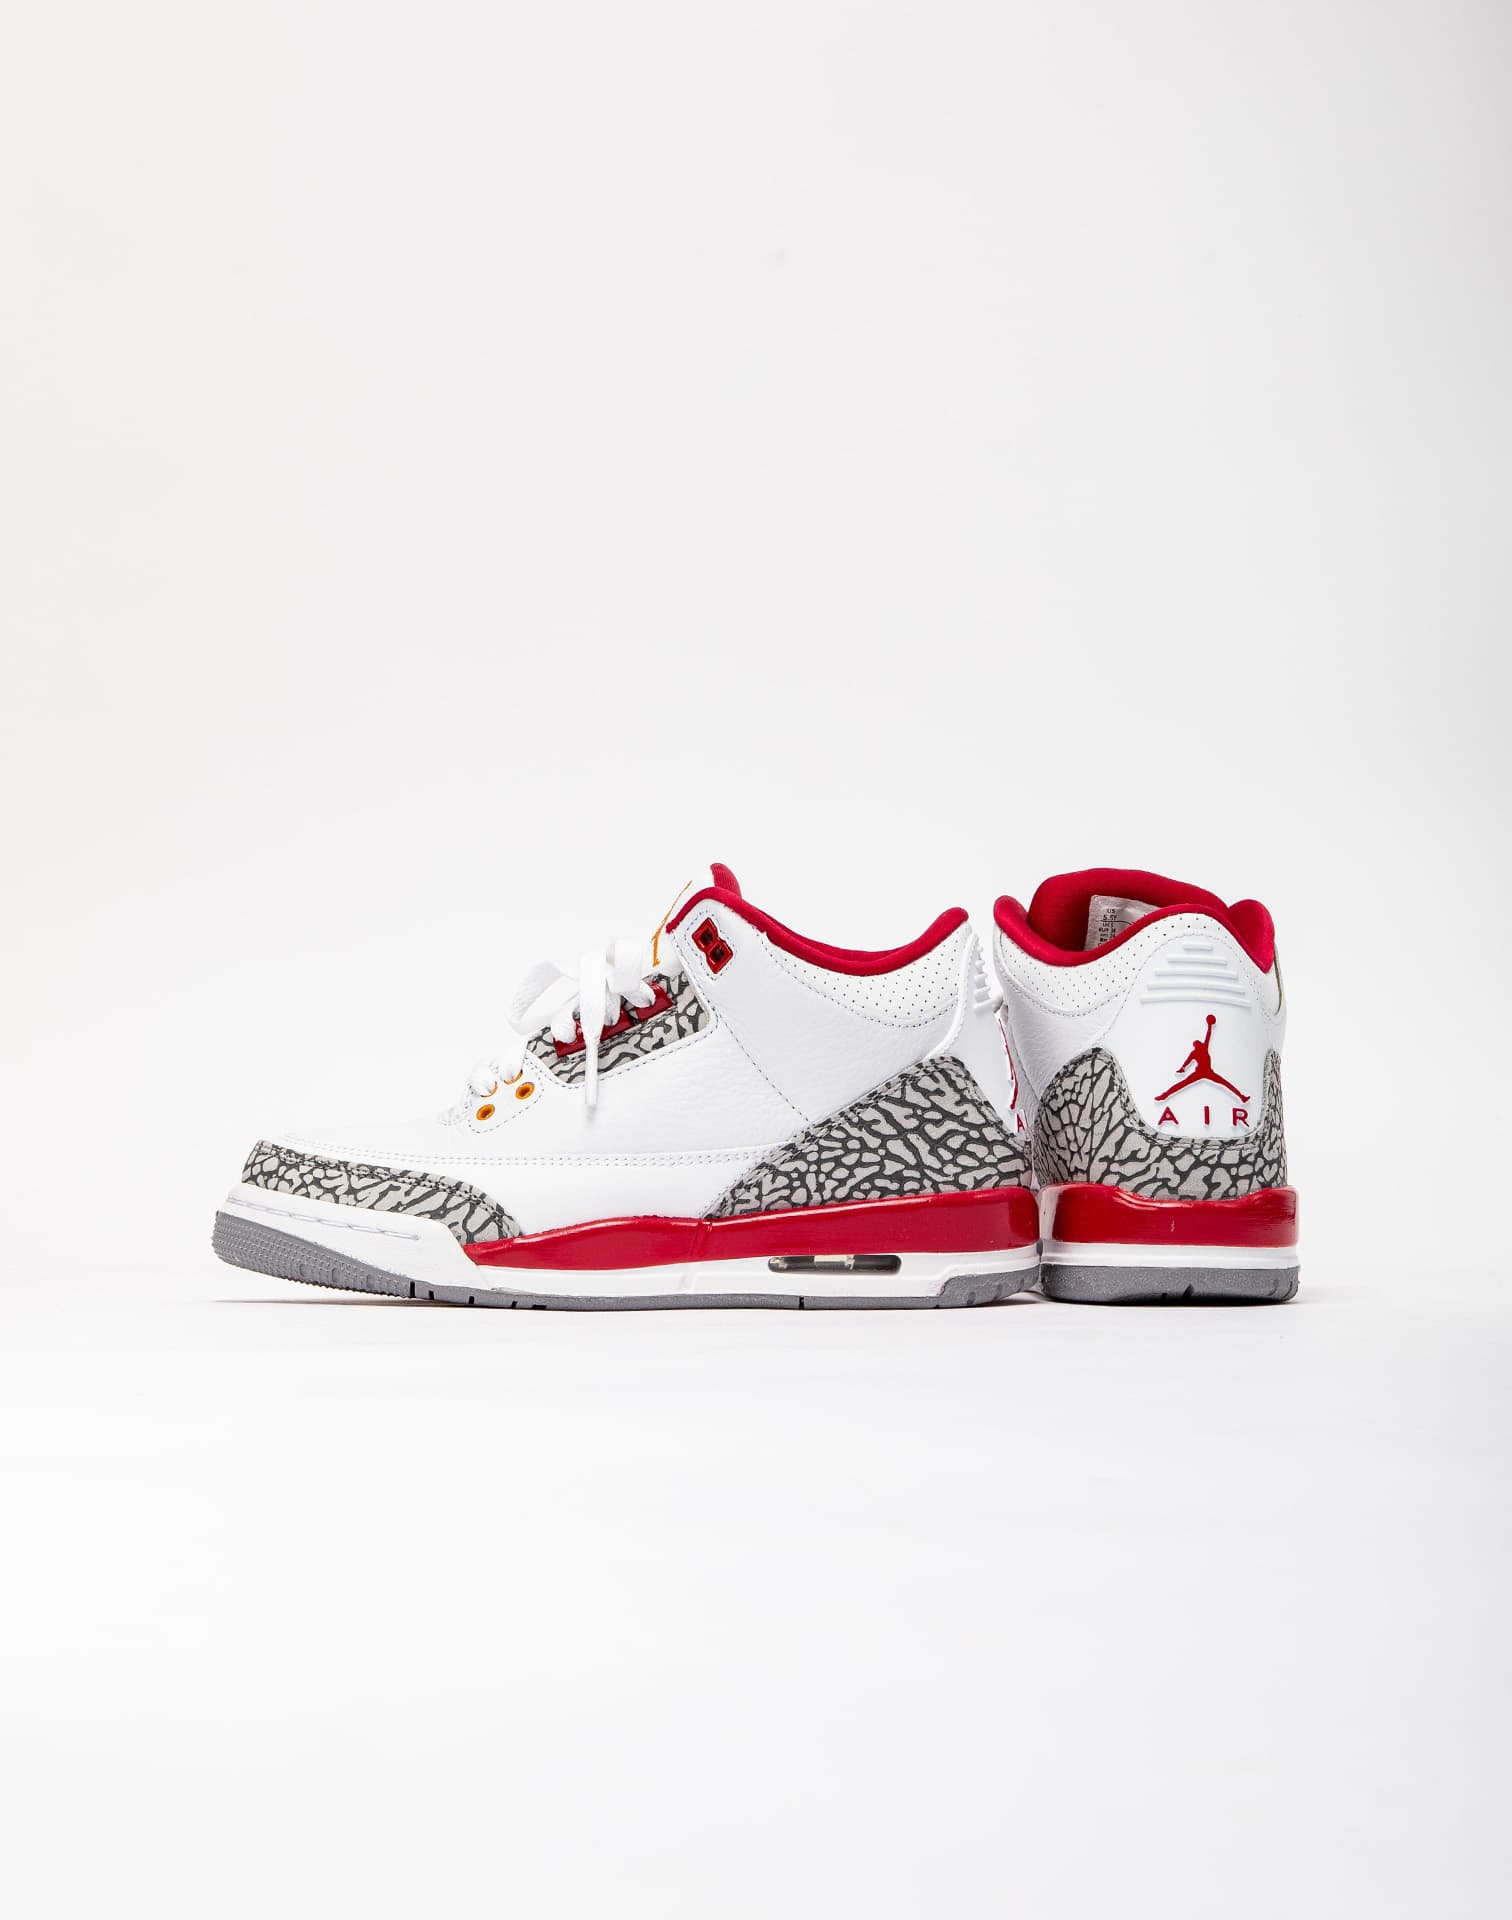 This Air Jordan 3 Retro Plays for the Washington Wizards – DTLR